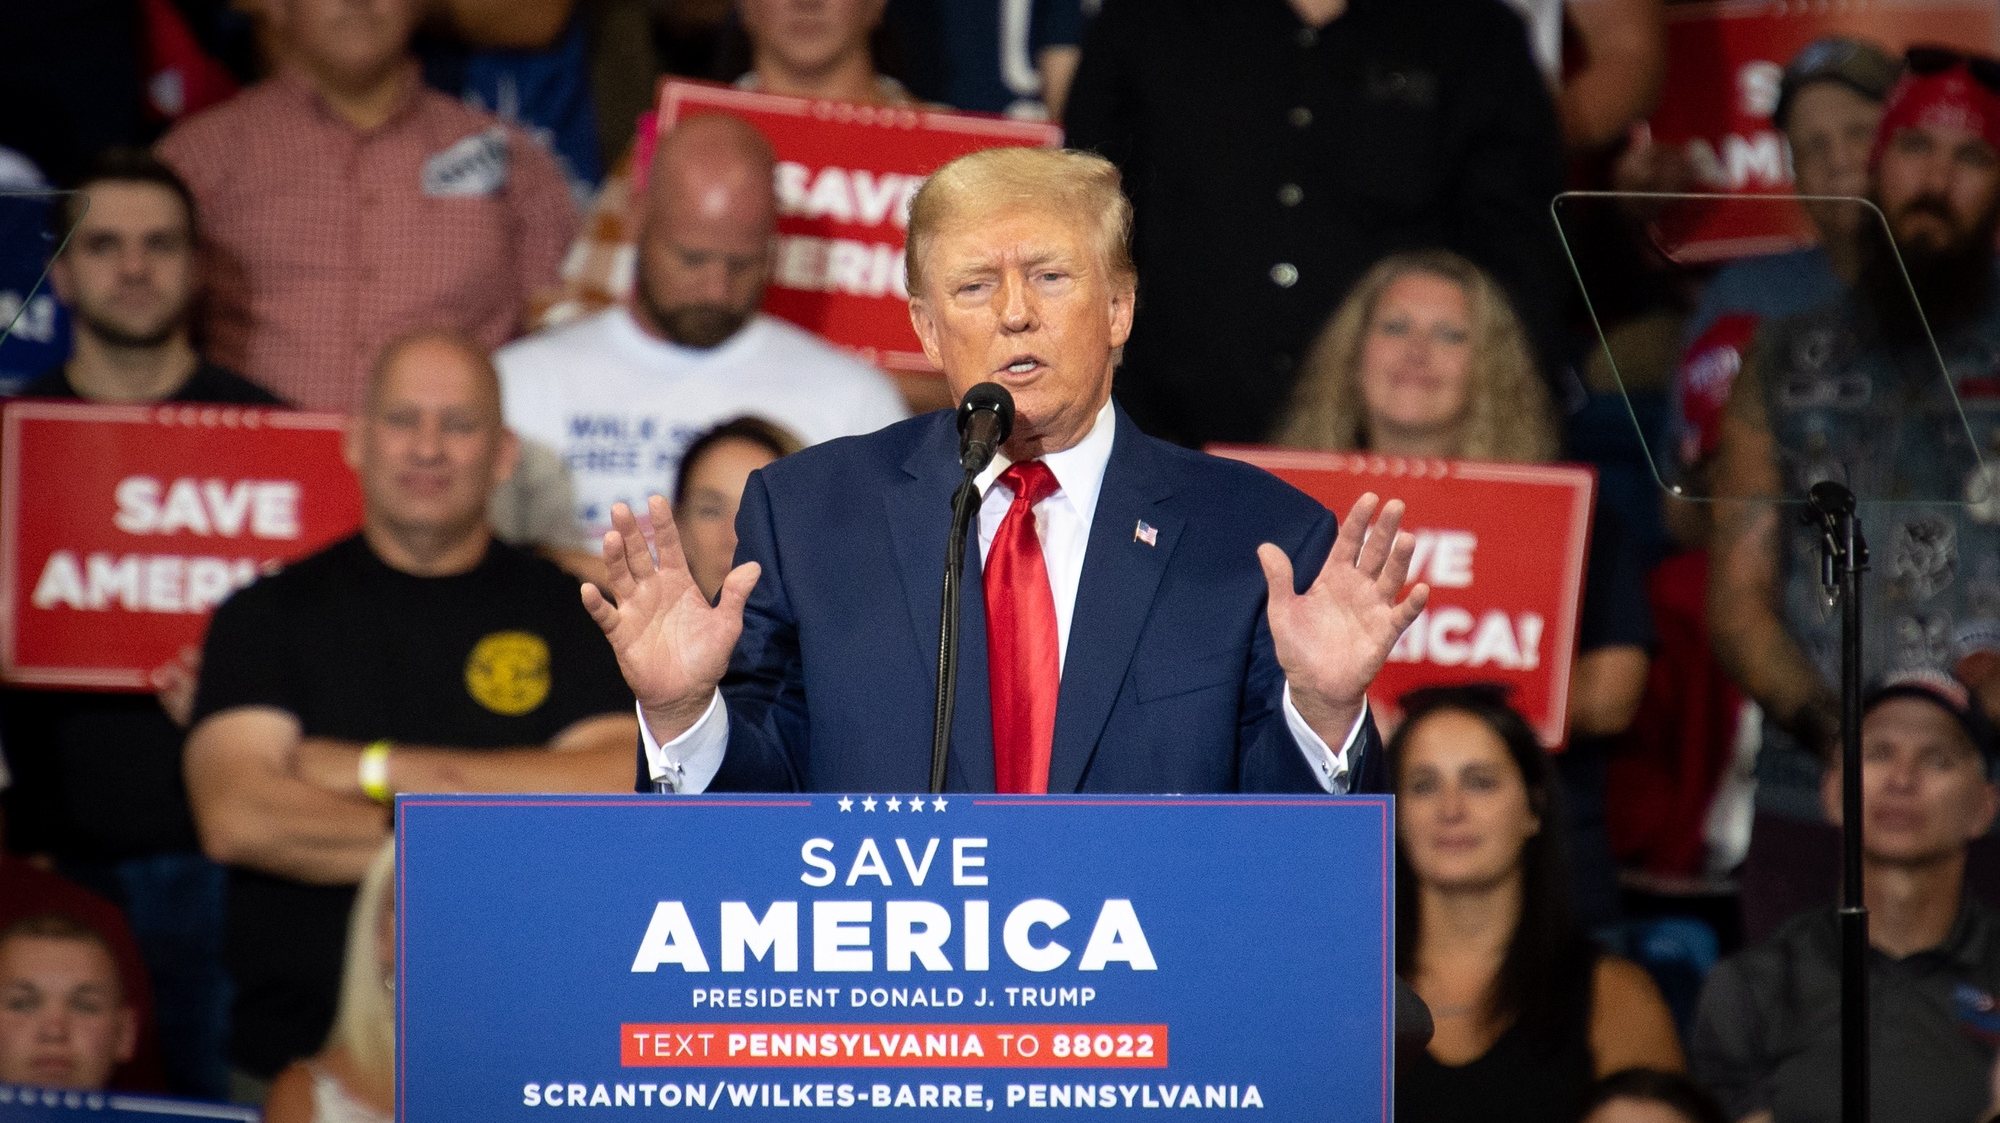 epa10158590 Former President Donald J. Trump speaks at the Mohegan Sun Arena in Wilkes-Barre, Pennsylvania, USA, 03 September 2022. This is Trump’s first public appearance since the 08 August raid of Mar-a-Lago in Palm Beach, Florida.  EPA/TRACIE VAN AUKEN